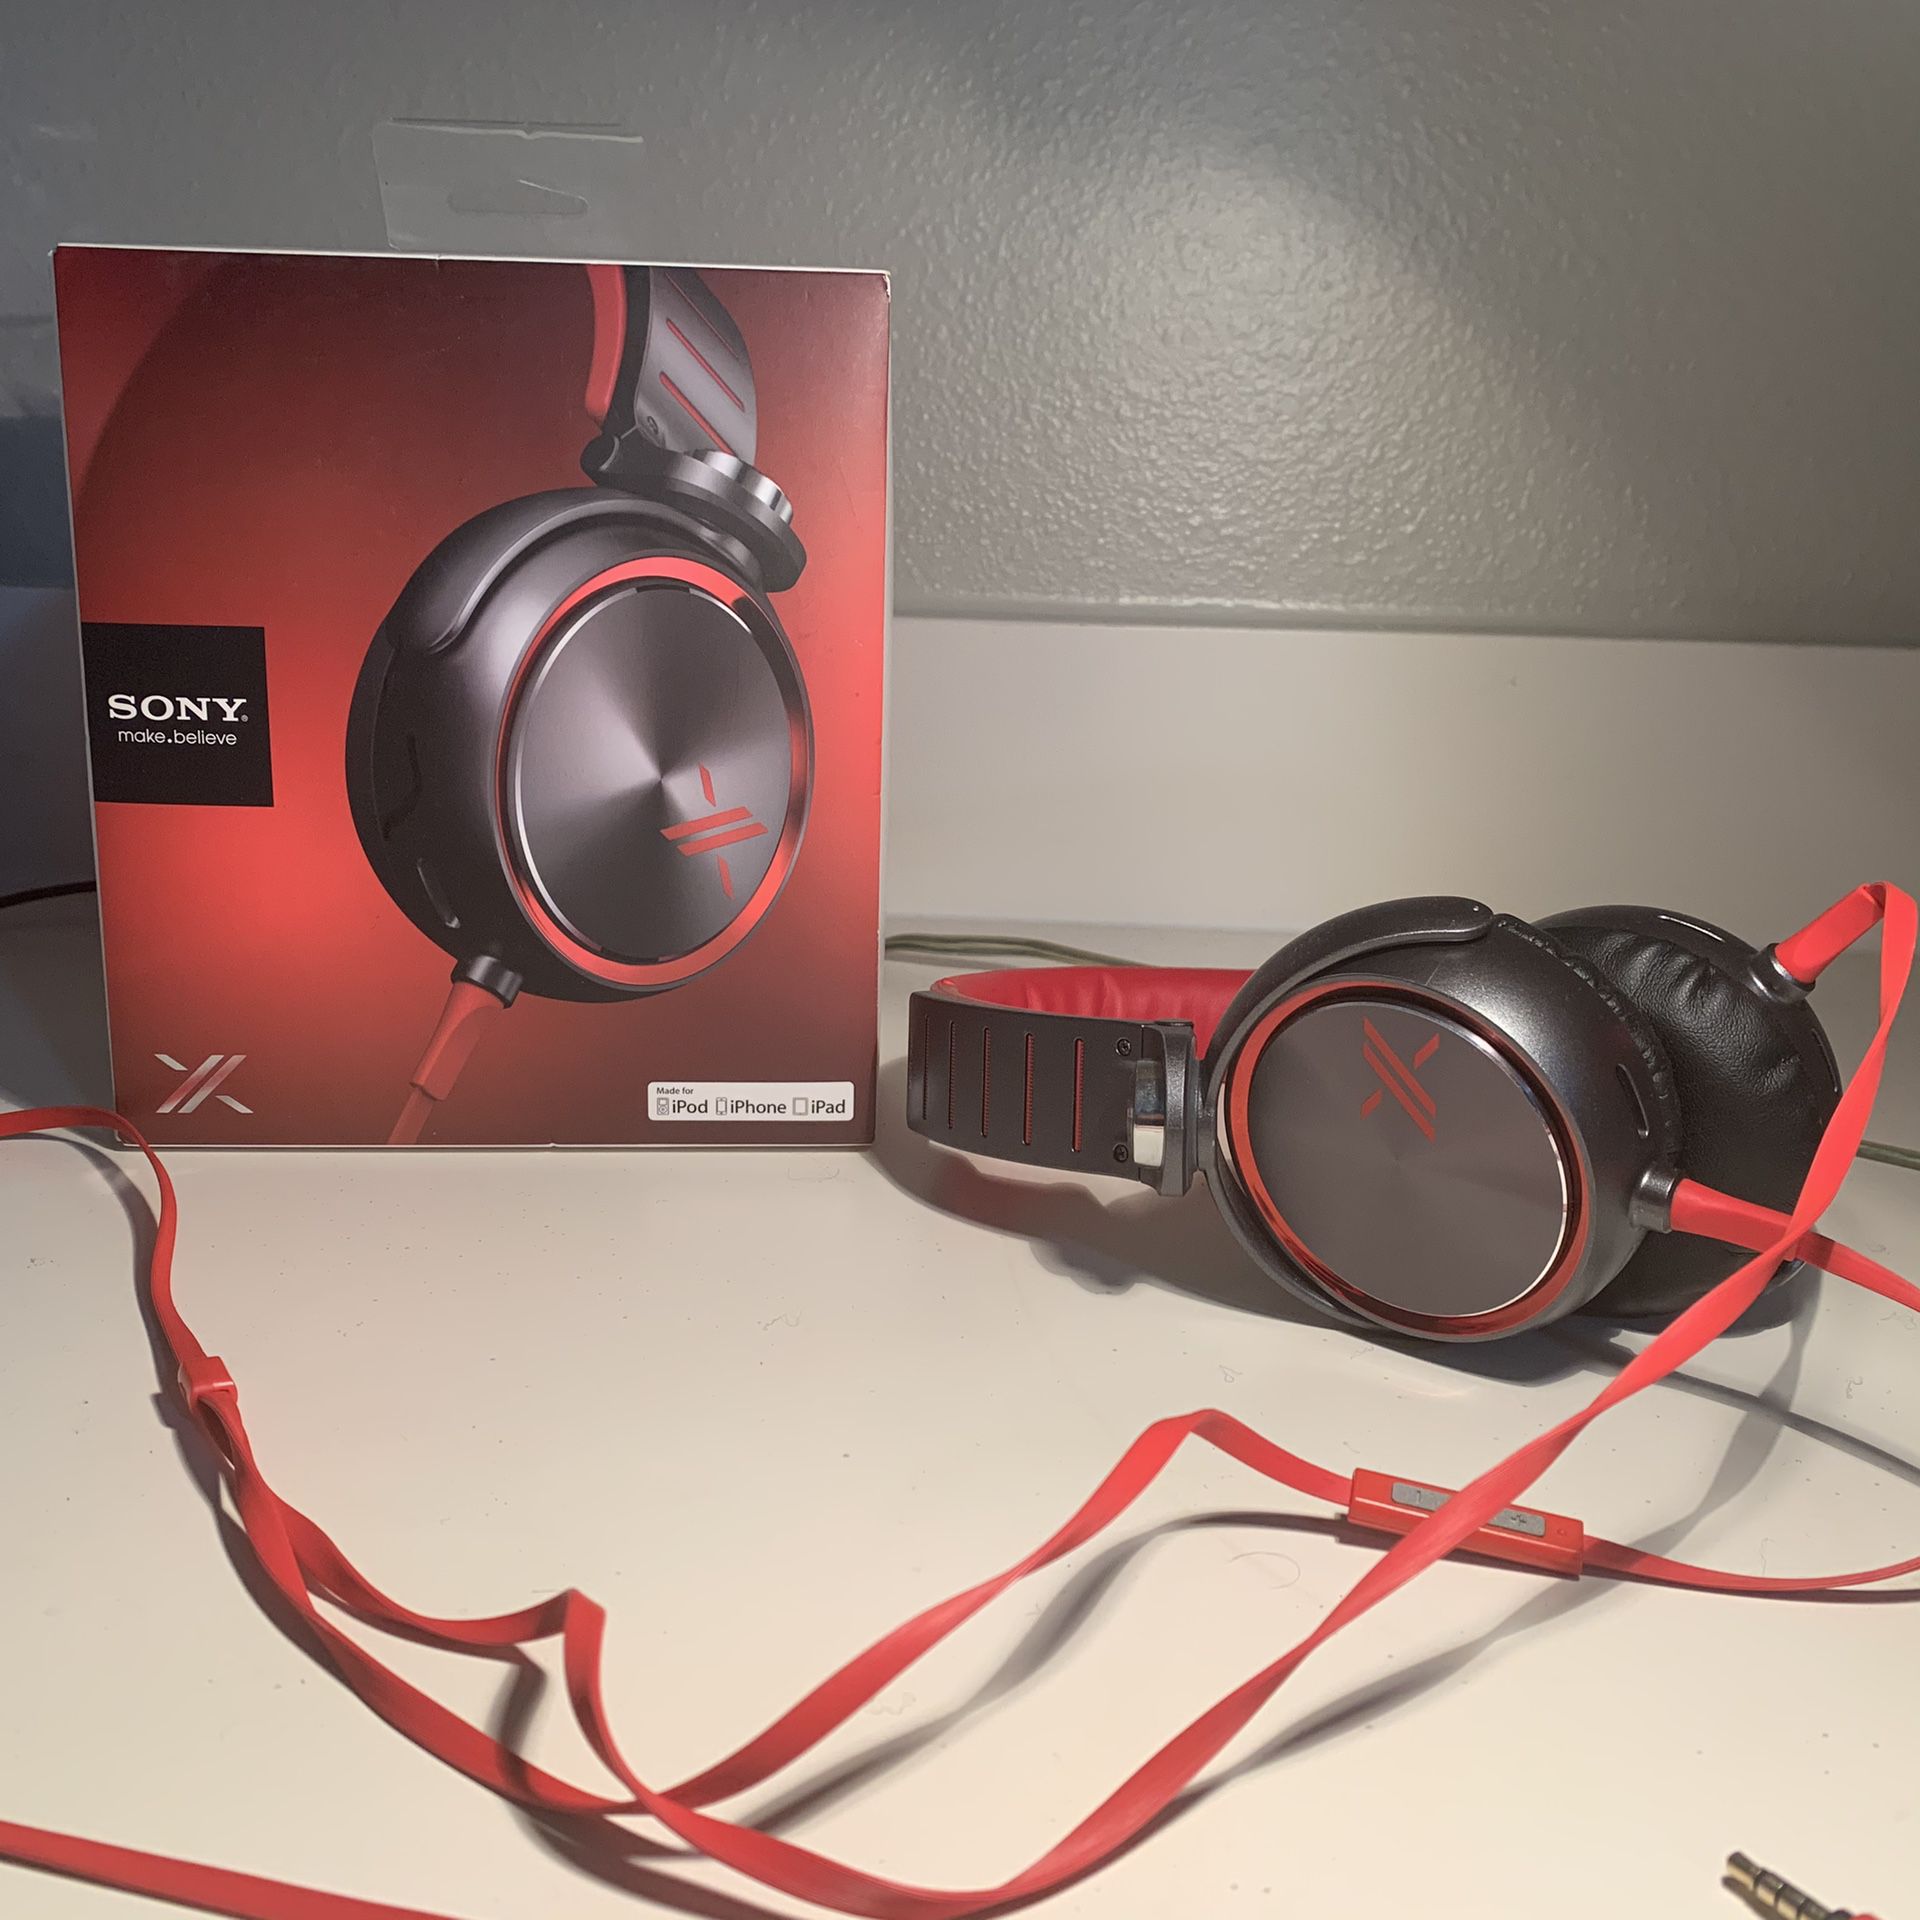 SONY MDR-X05 Stereo Headphones Red/Grey